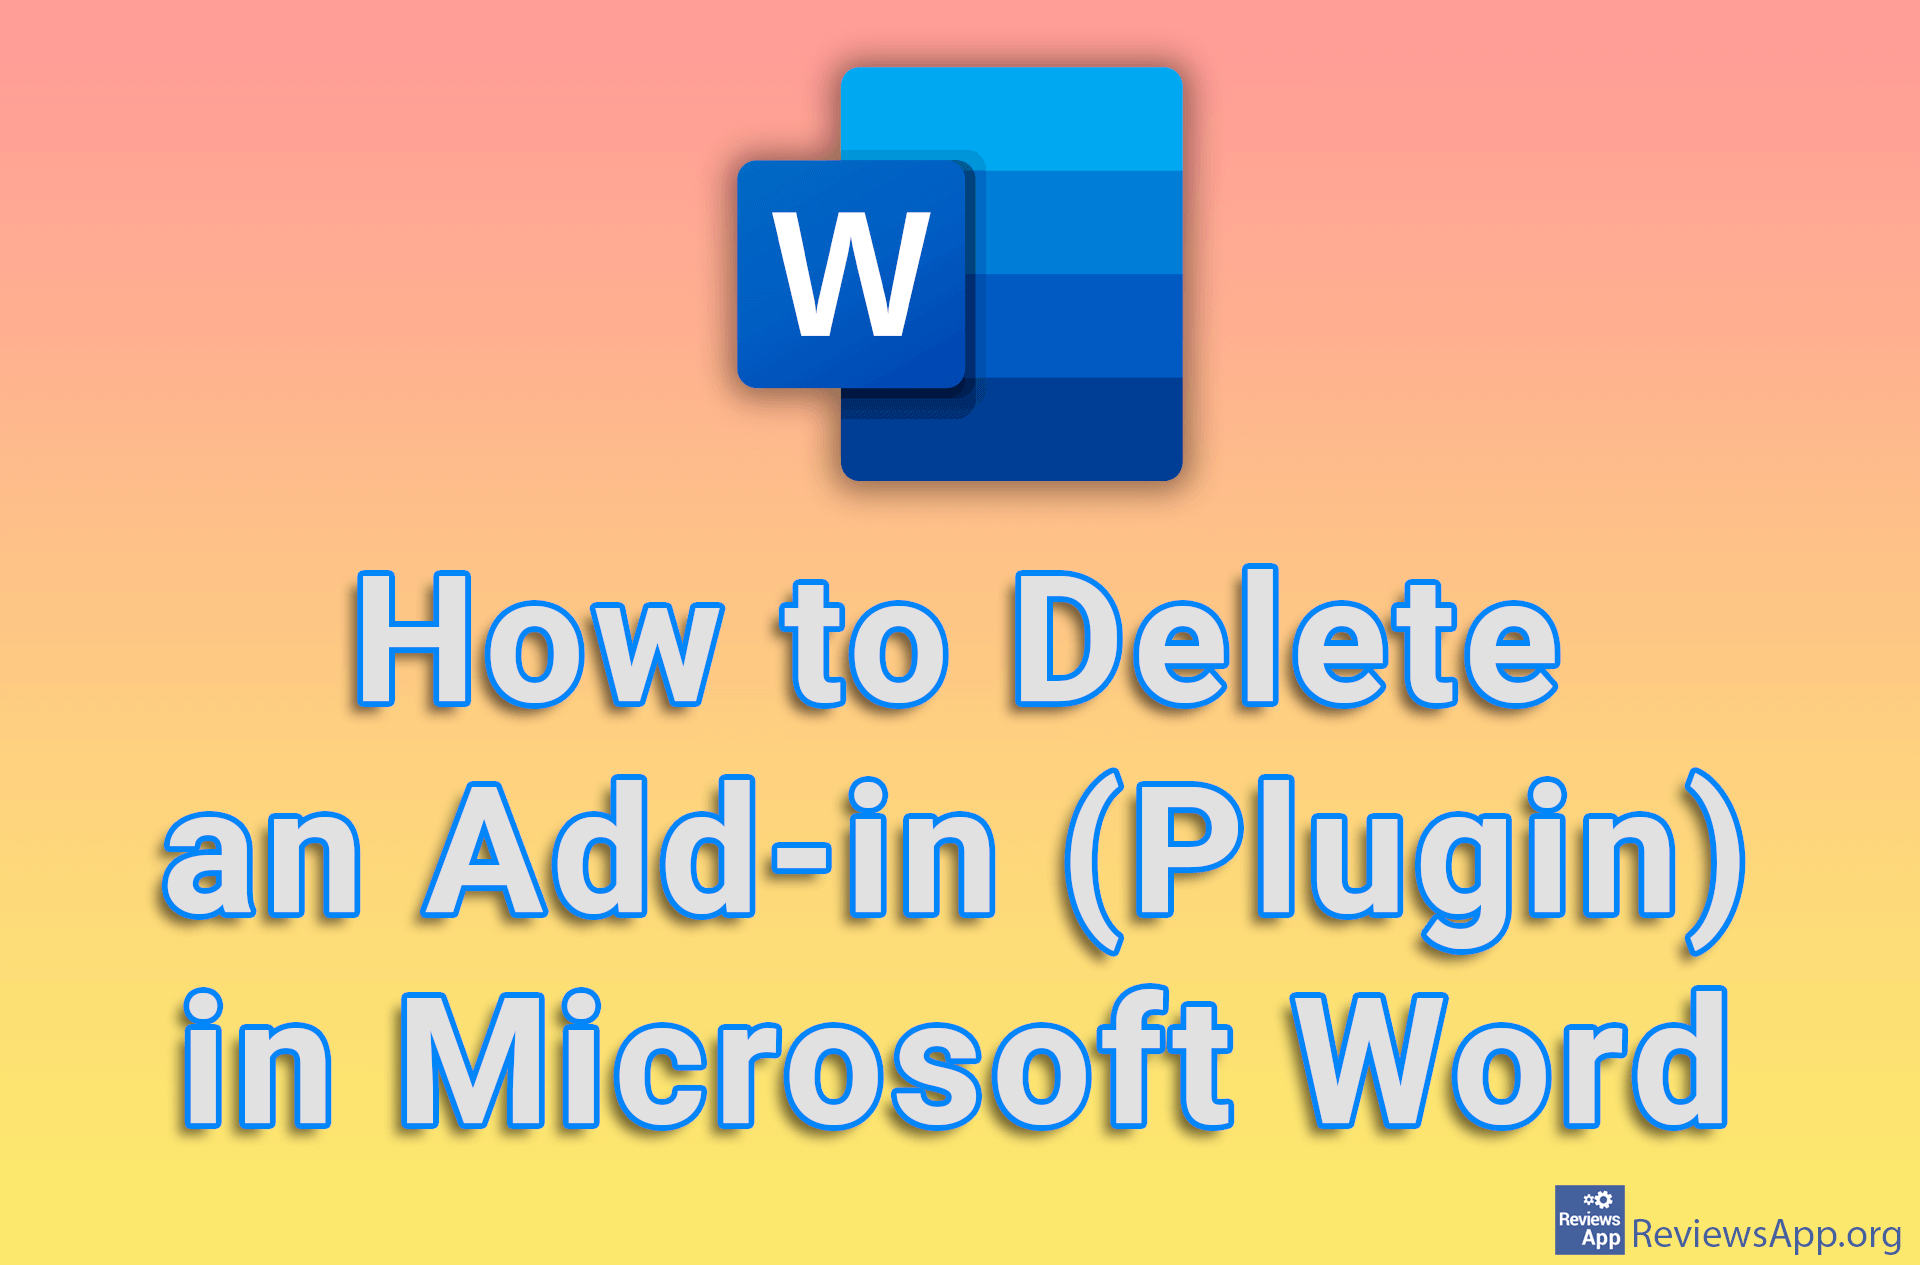 How to Delete an Add-in (Plugin) in Microsoft Word